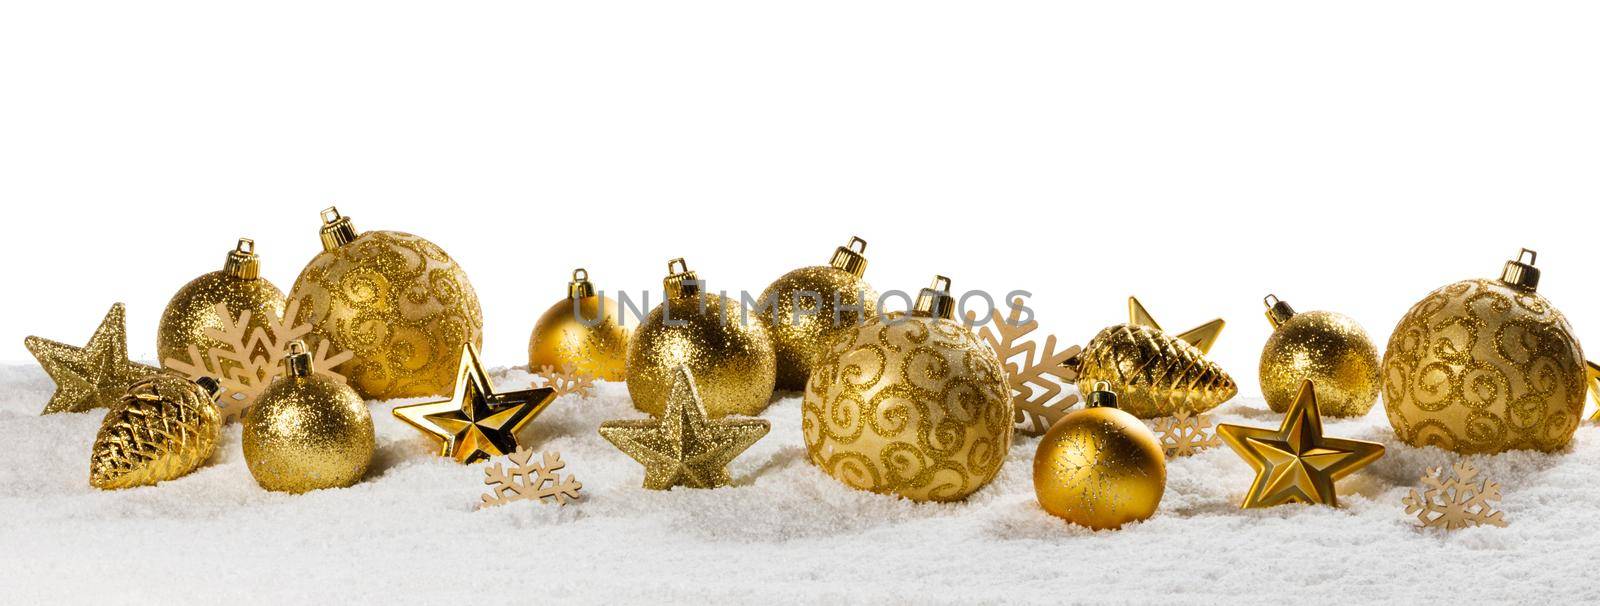 Christmas golden baubles on snow by Yellowj